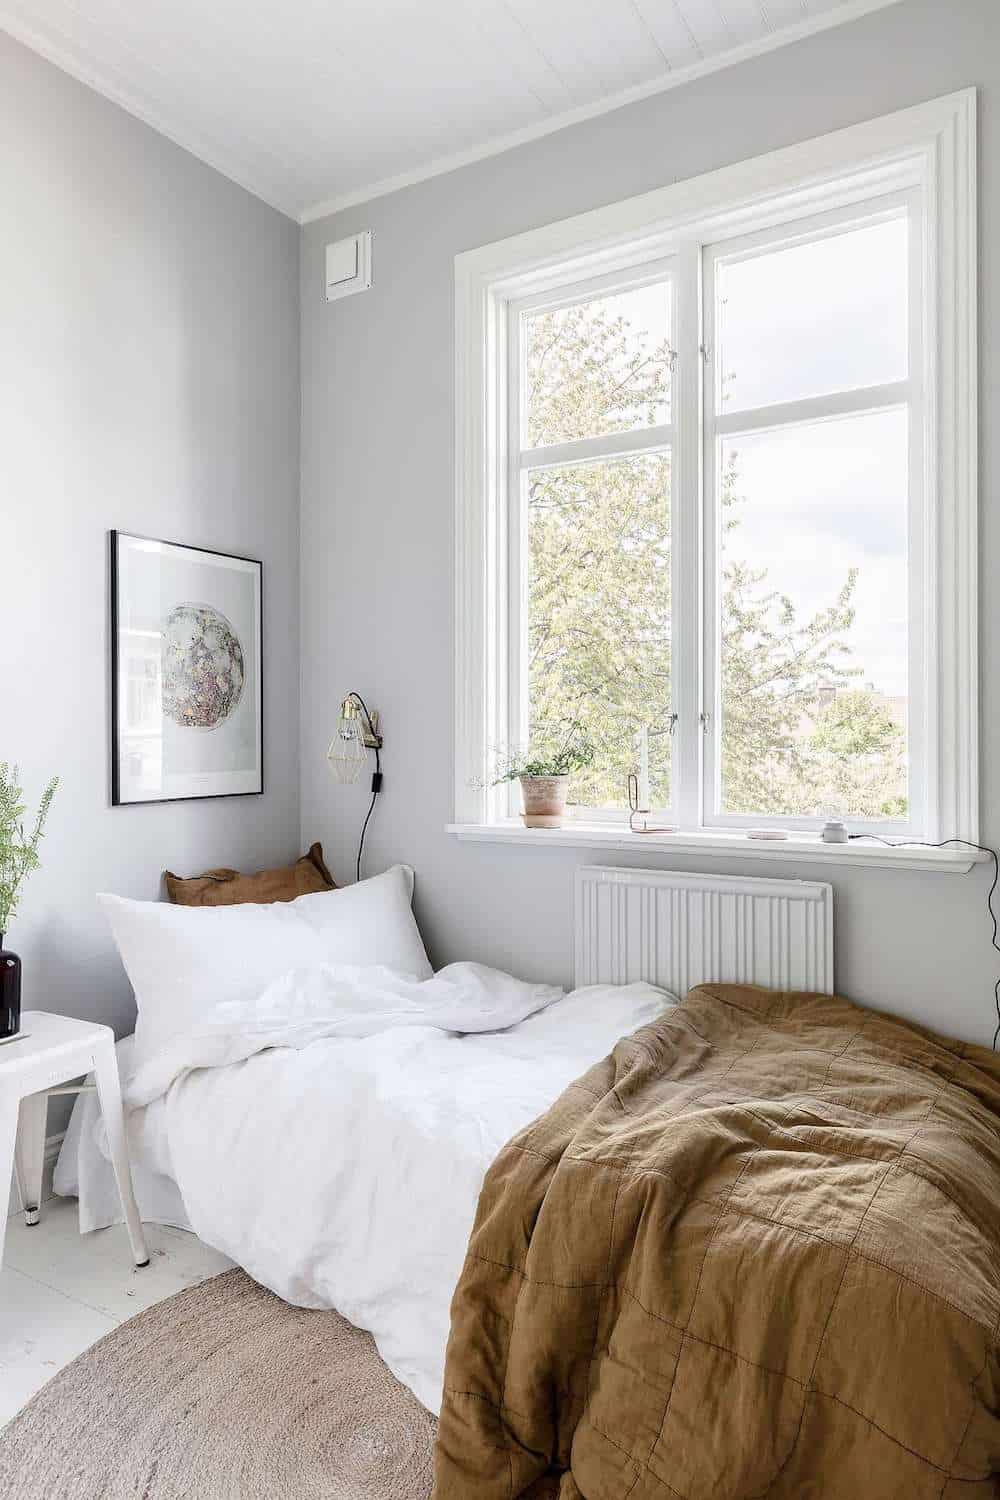 image of a bedroom with a small white bed and minimalist decor